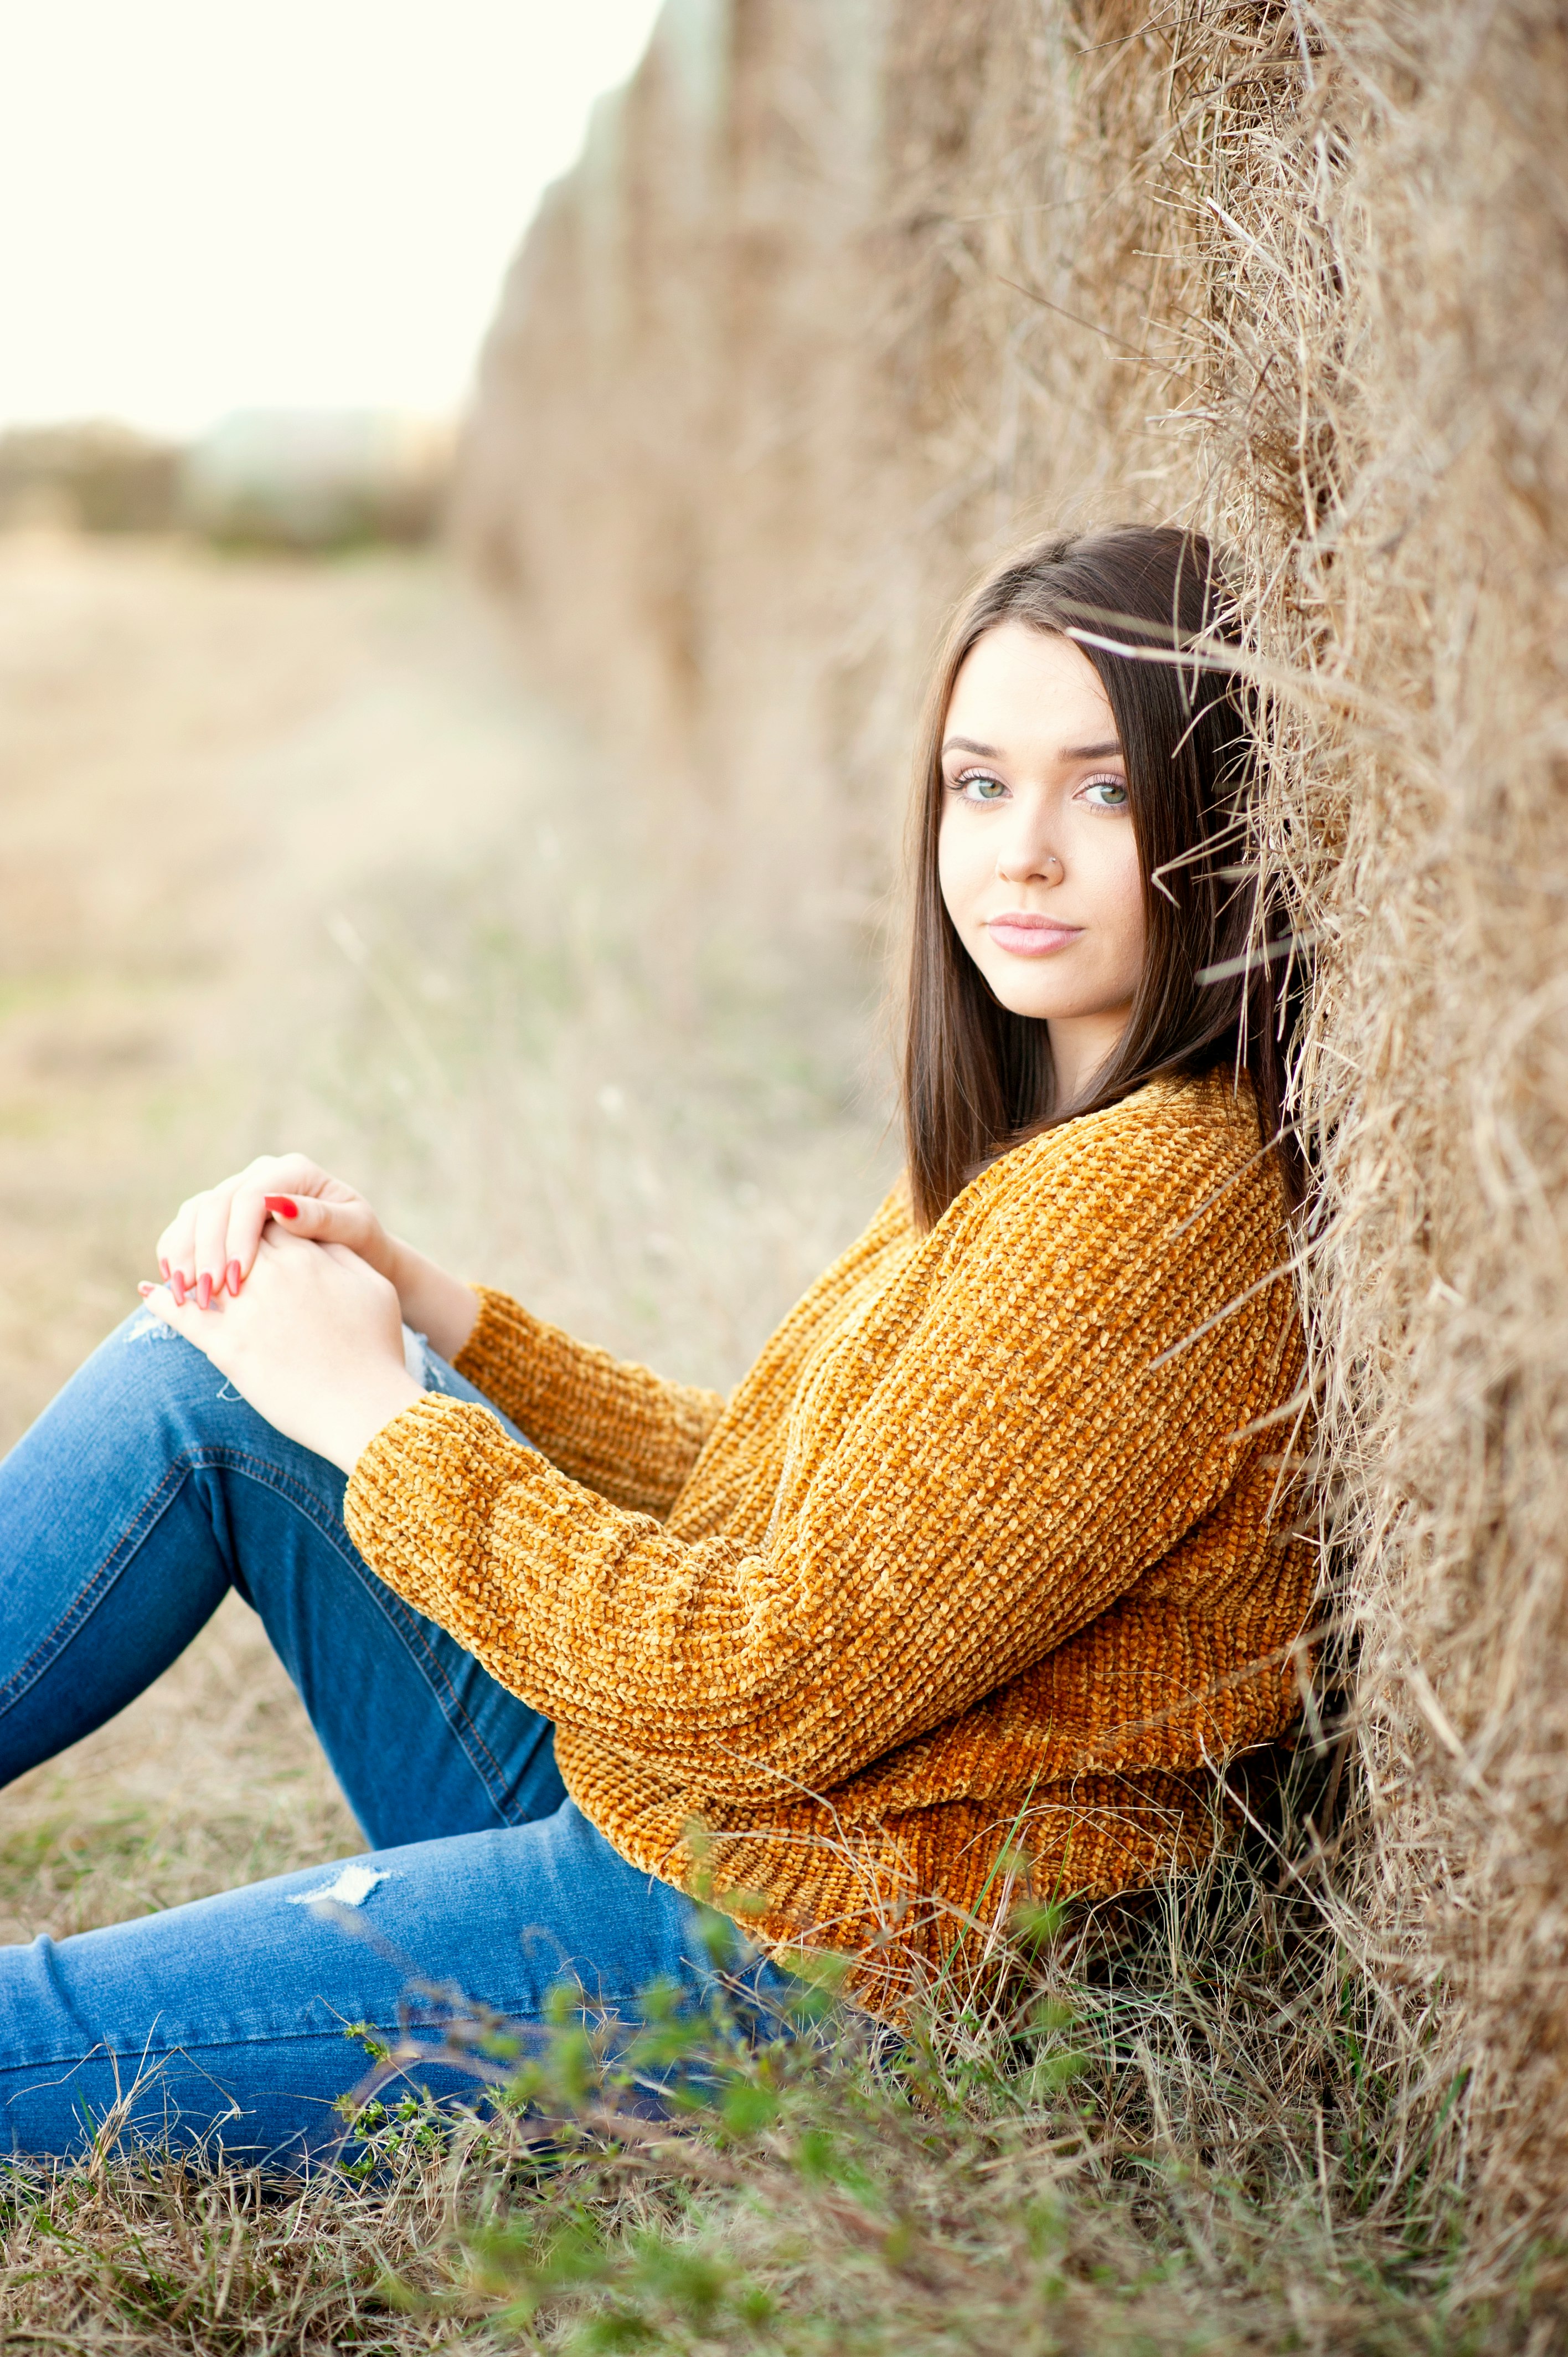 woman in yellow knit sweater and blue denim jeans sitting on brown grass field during daytime